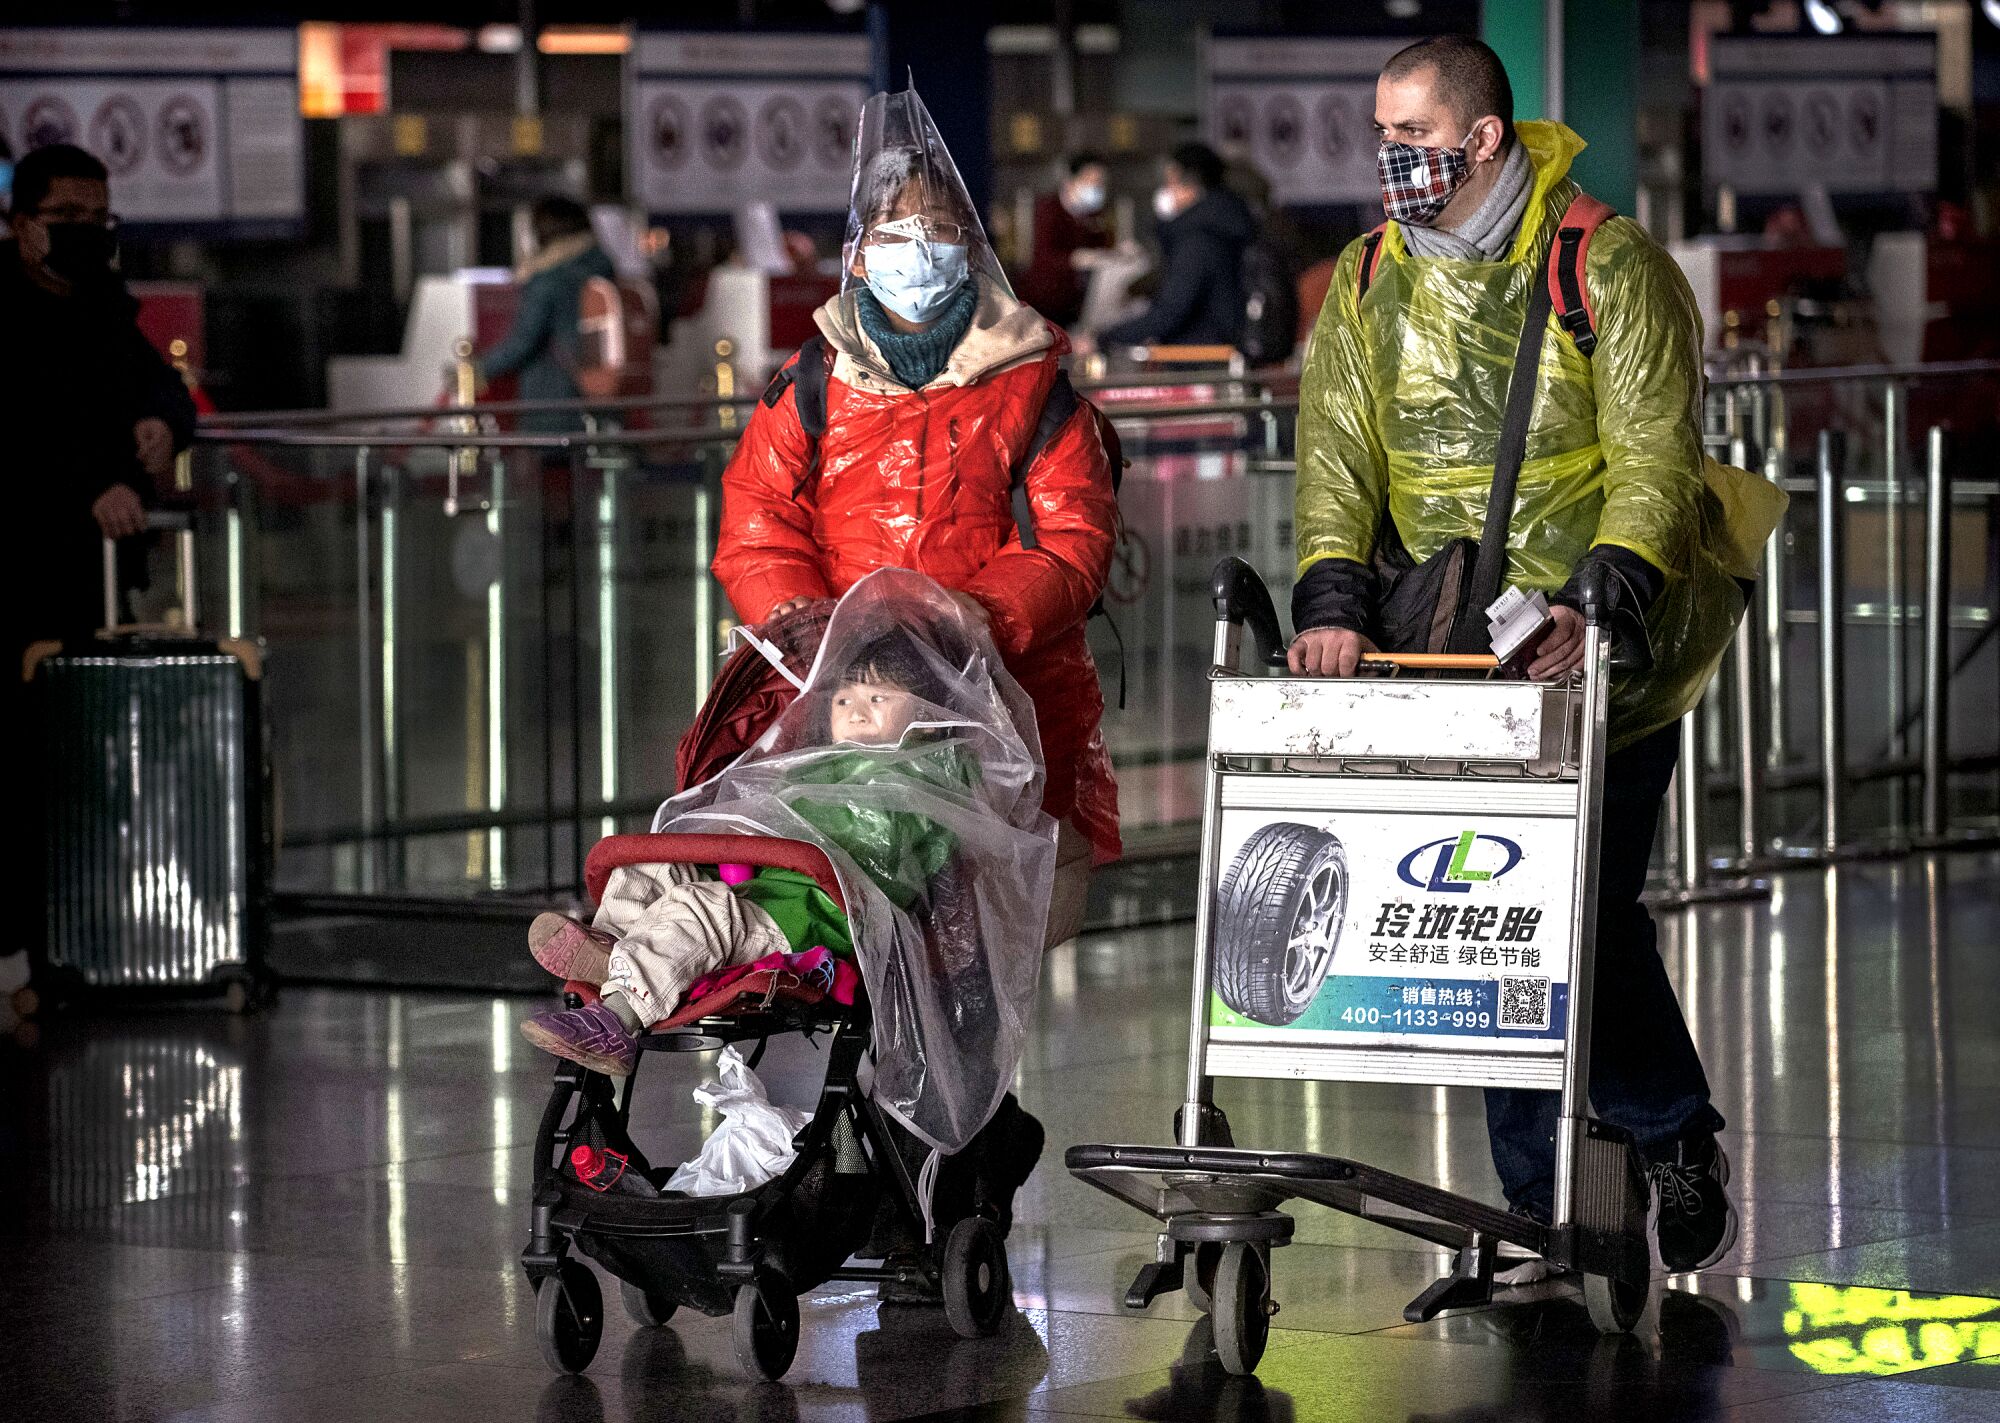 CHINA: A family wears masks and protective plastic covering after checking in to their flight at Beijing Capital International Airport.